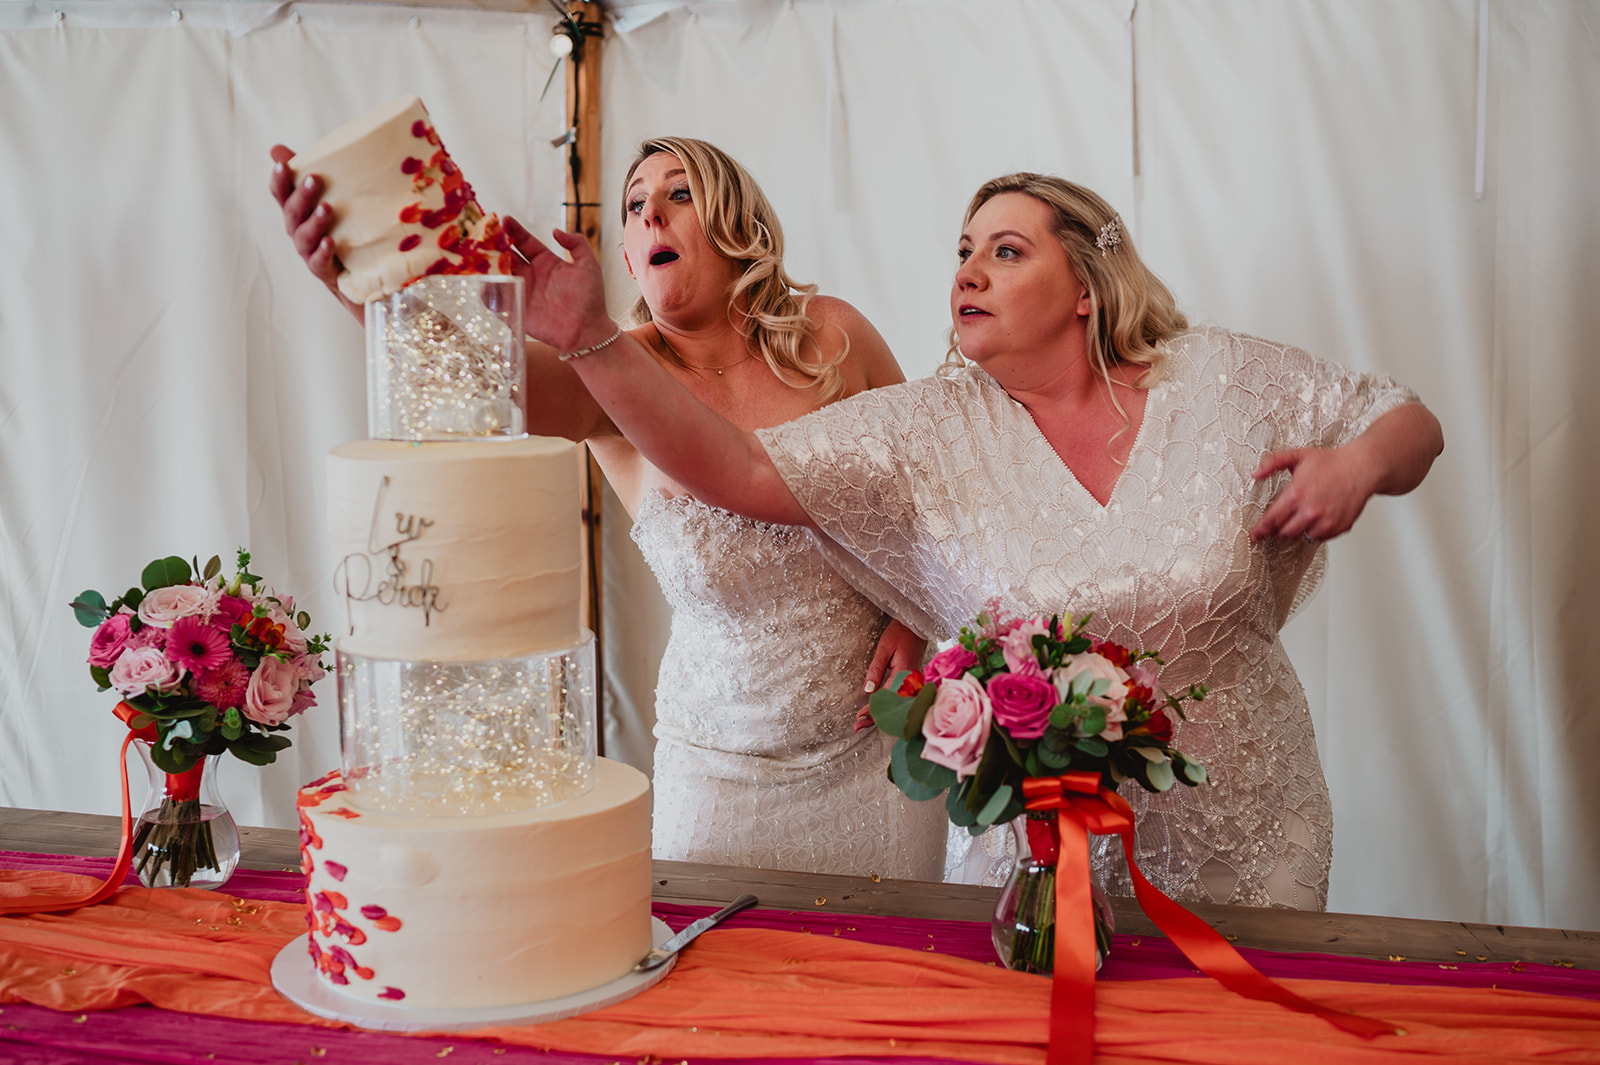 A just married same sex couple save their cake from toppling over during the cake cut